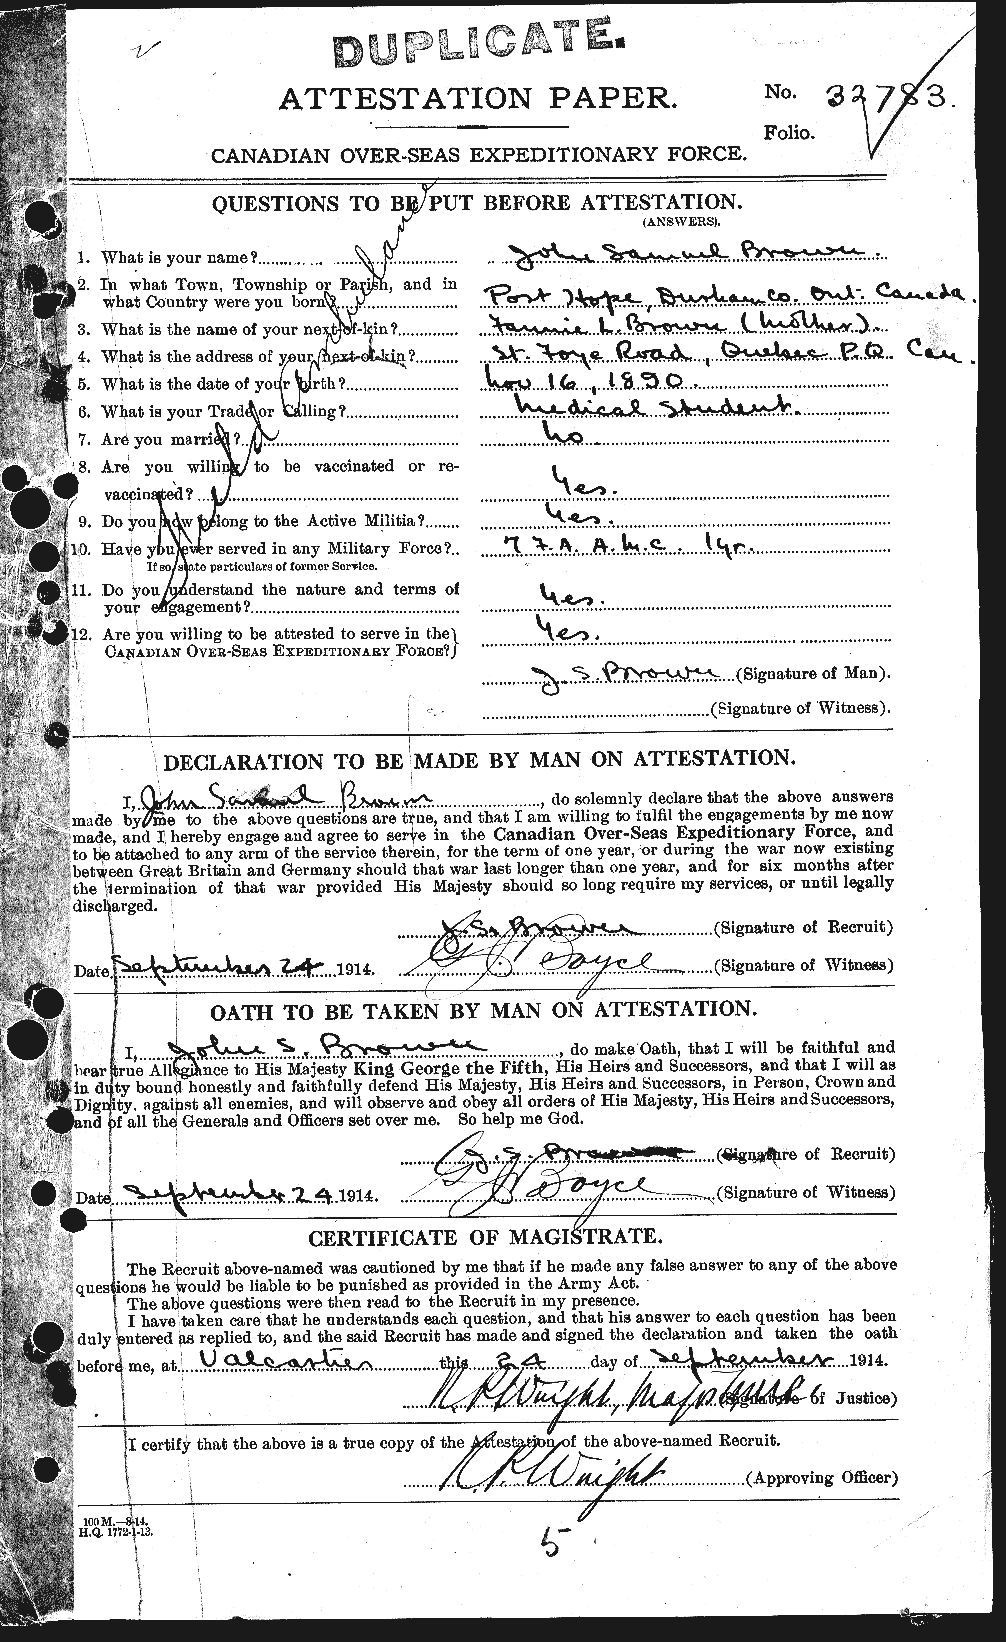 Personnel Records of the First World War - CEF 265865a